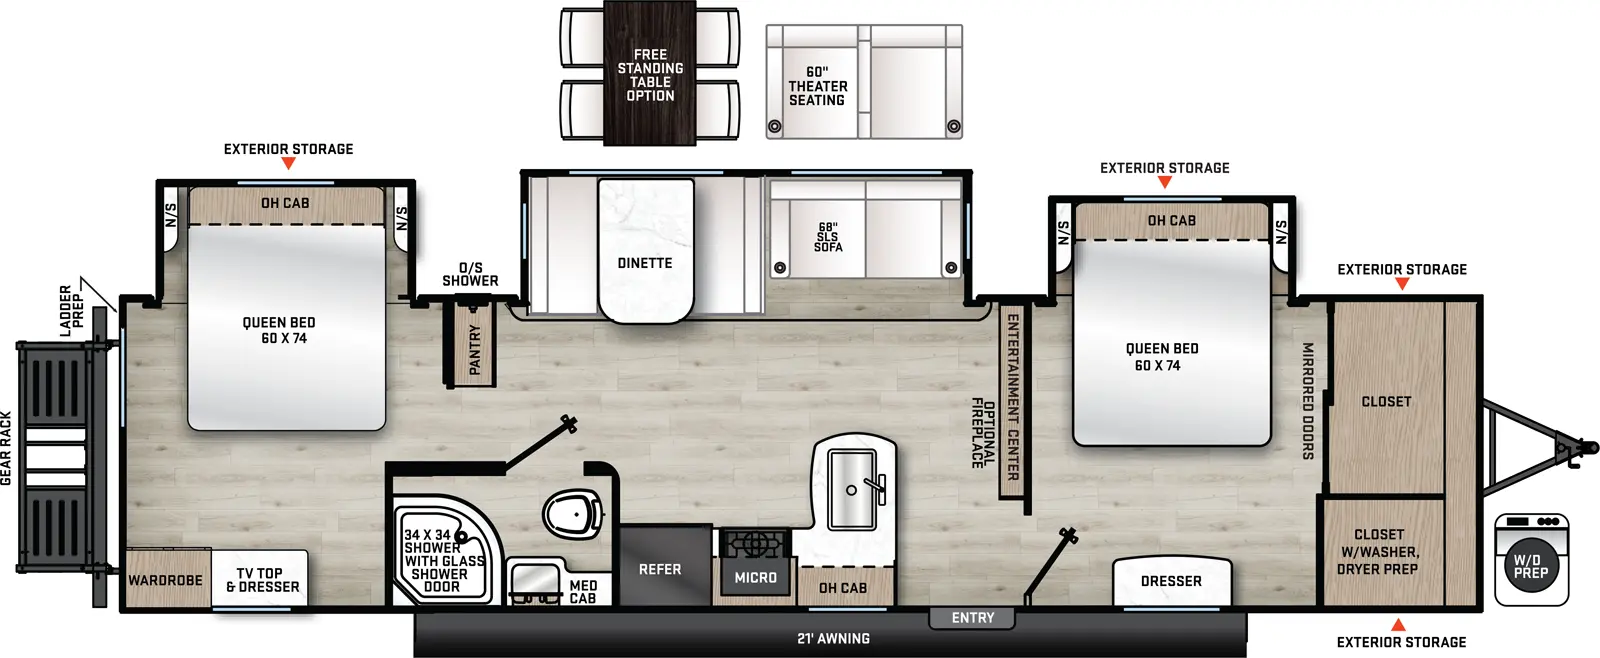 Catalina Legacy Edition 343BHTS (2 Queen Beds) Floorplan